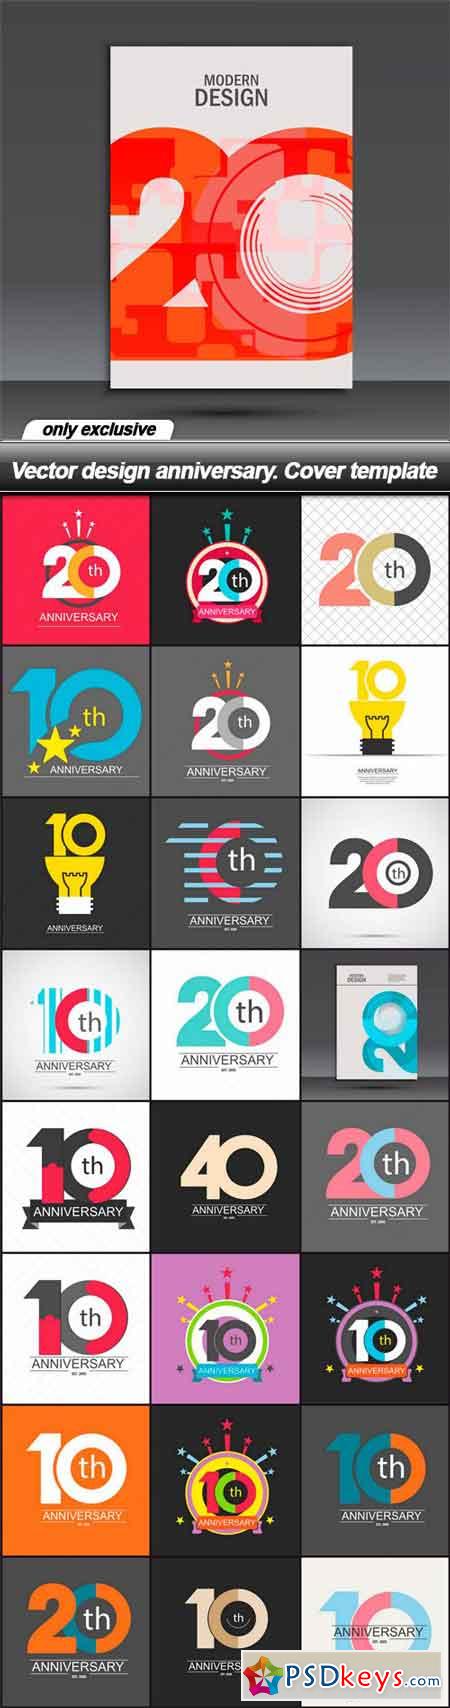 Vector design anniversary. Cover template - 25 EPS